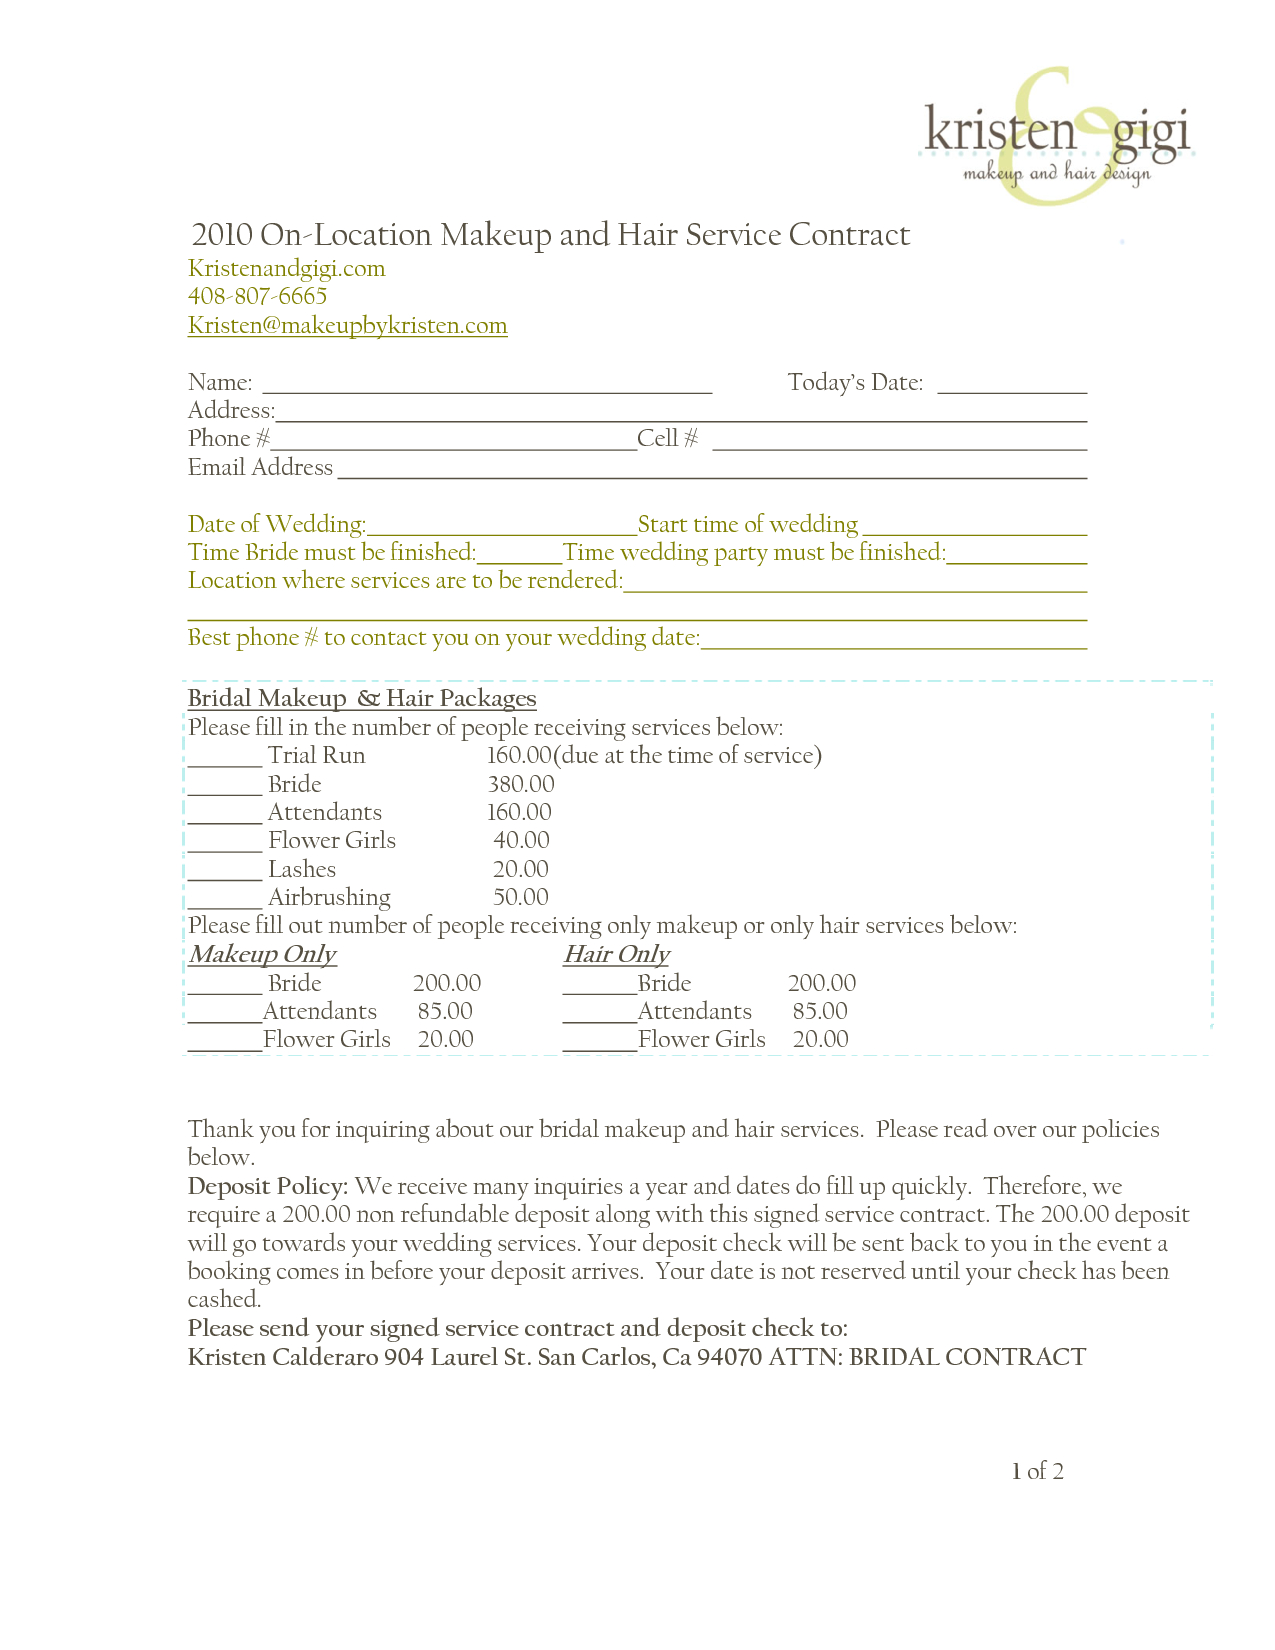 Bridalhaircotract | 2010 On Location Makeup And Hair Service Contract regarding Amazing Salon Employee Contract Template